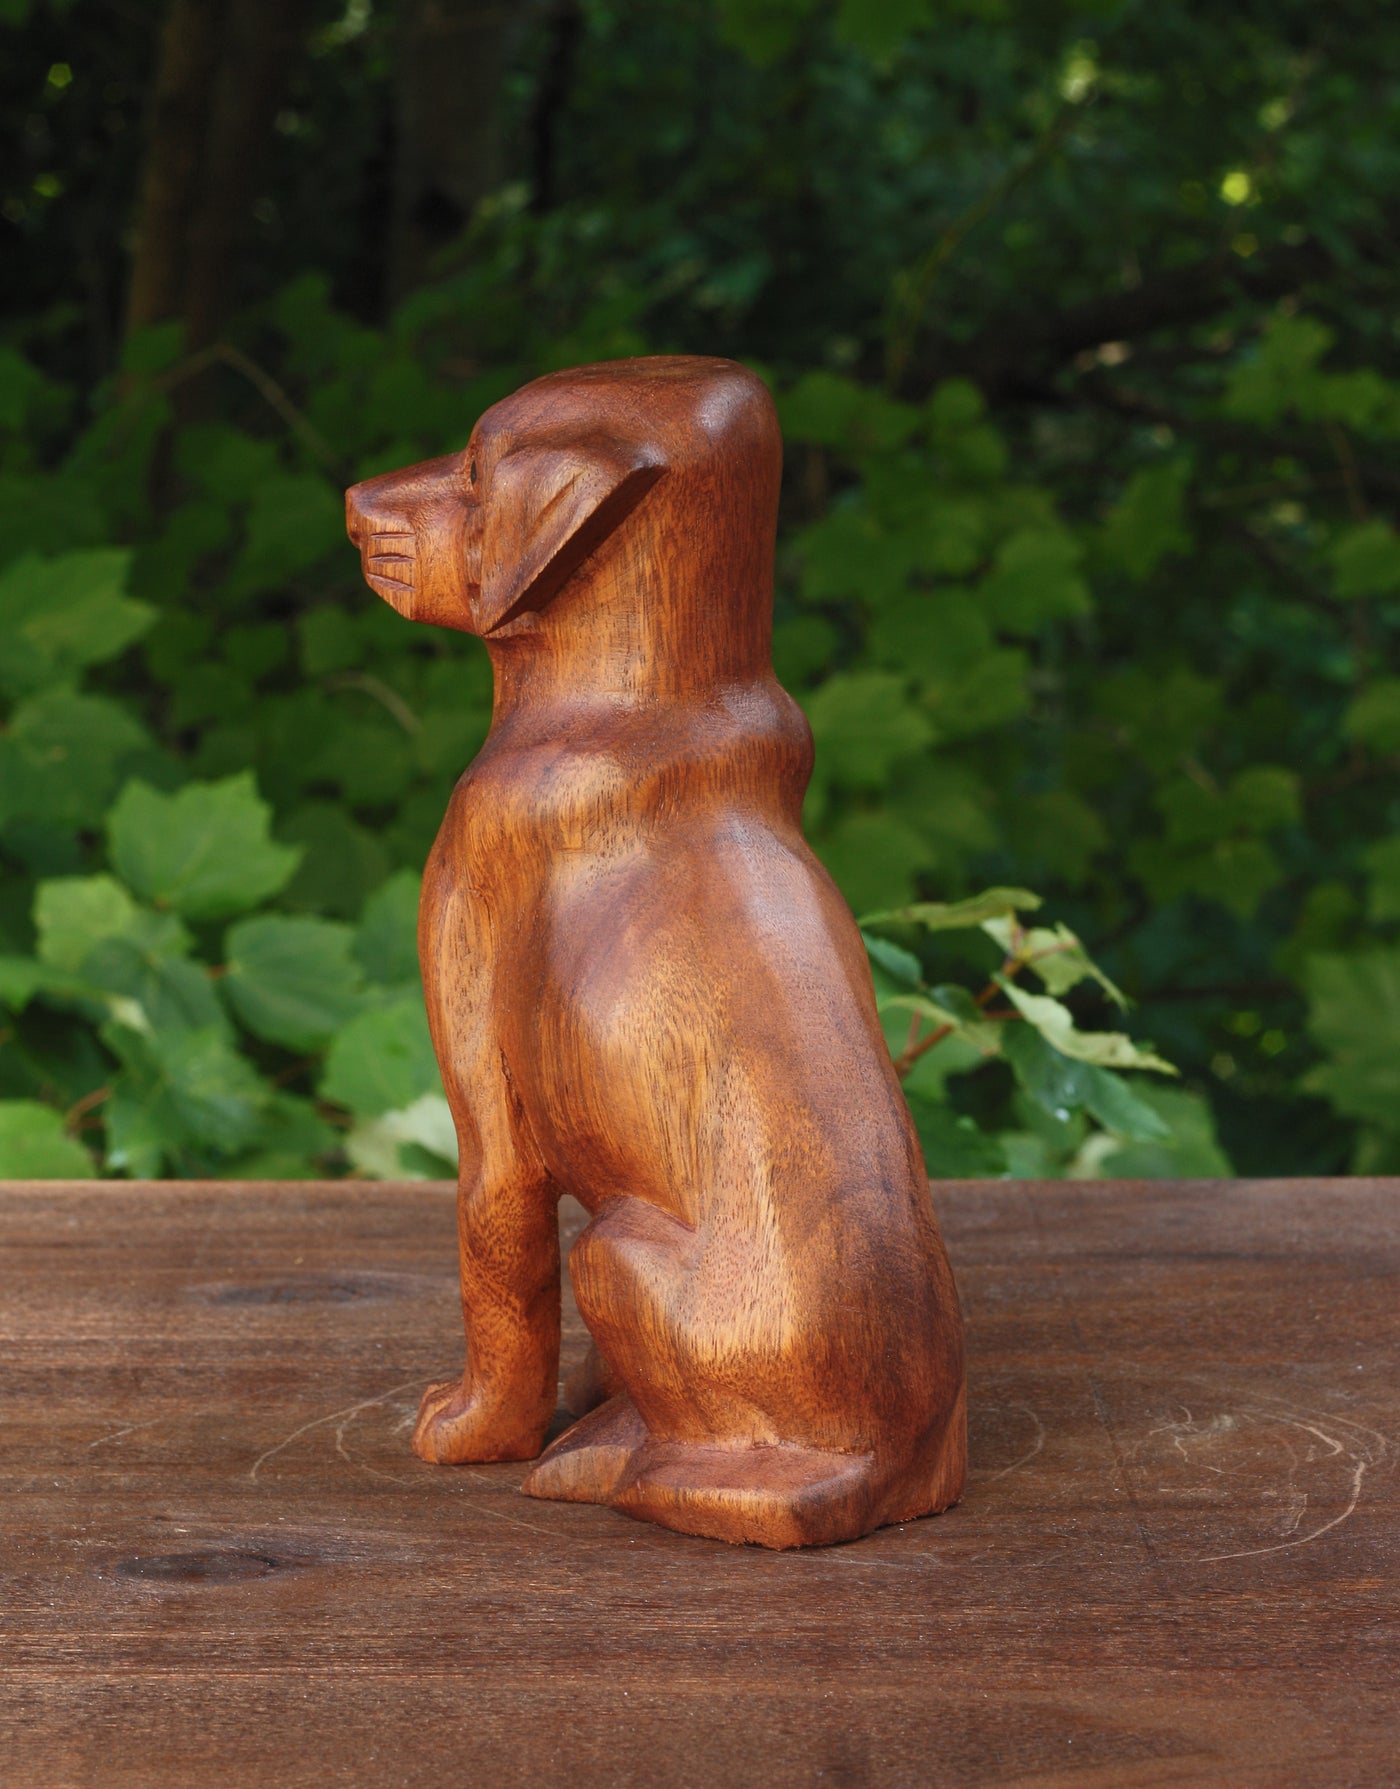 8" Wooden Hand Carved Dog Figurine Decor Sculpture Art Statue Home Decor Accent Lodge Wooden Handmade Handcrafted Decoration